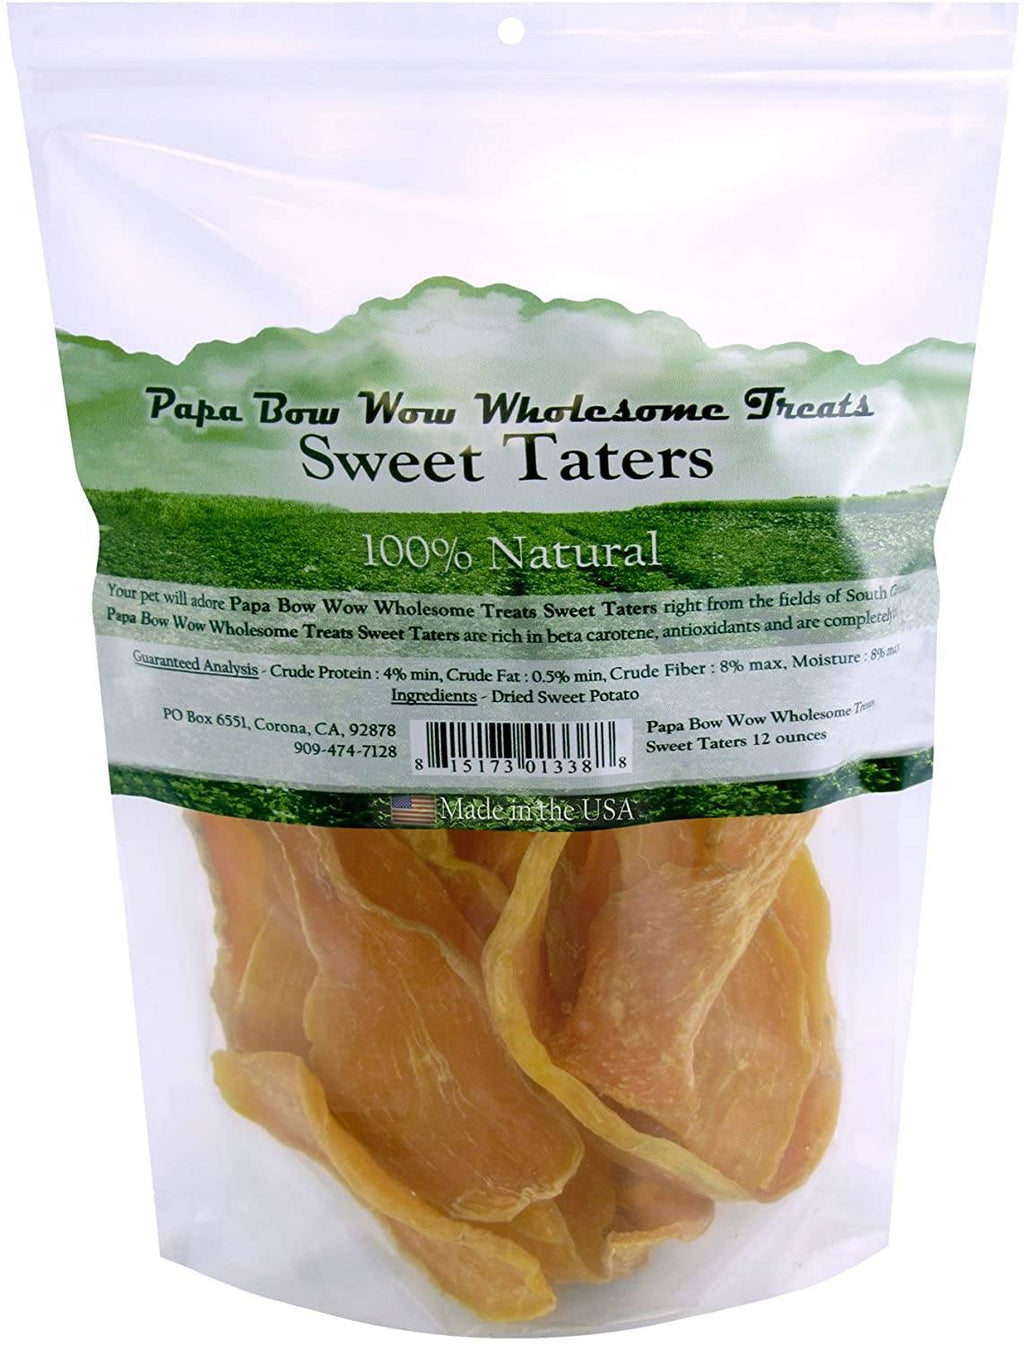 Papa Bow Wow Sweet Taters Dog Treats and Natural Chews - 3 Inch - 12 oz  